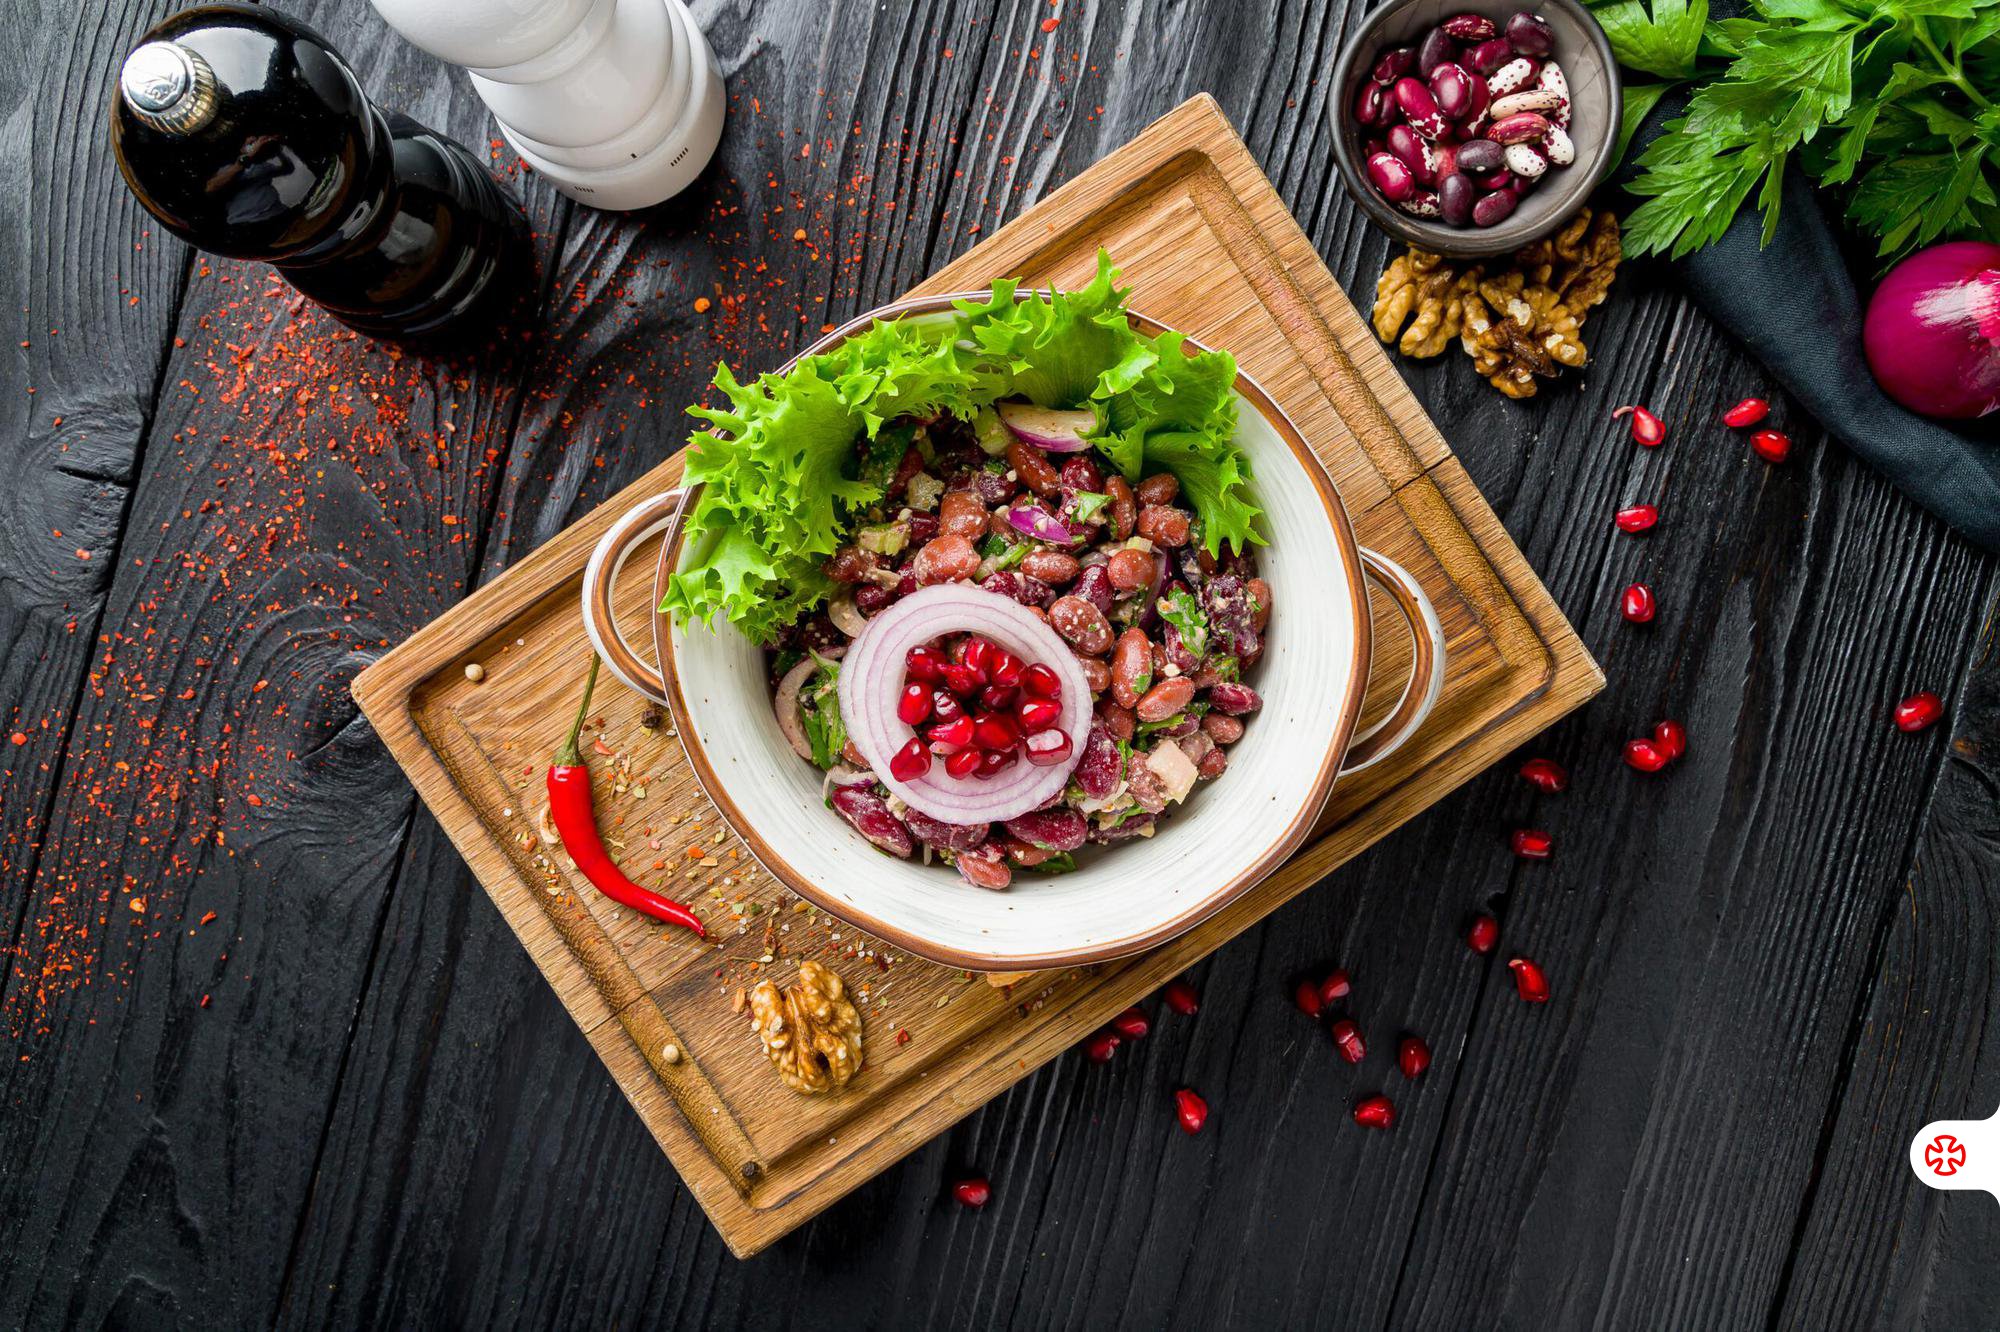 Lobio salad with pomegranate seeds, onion rings, and walnuts on a plate